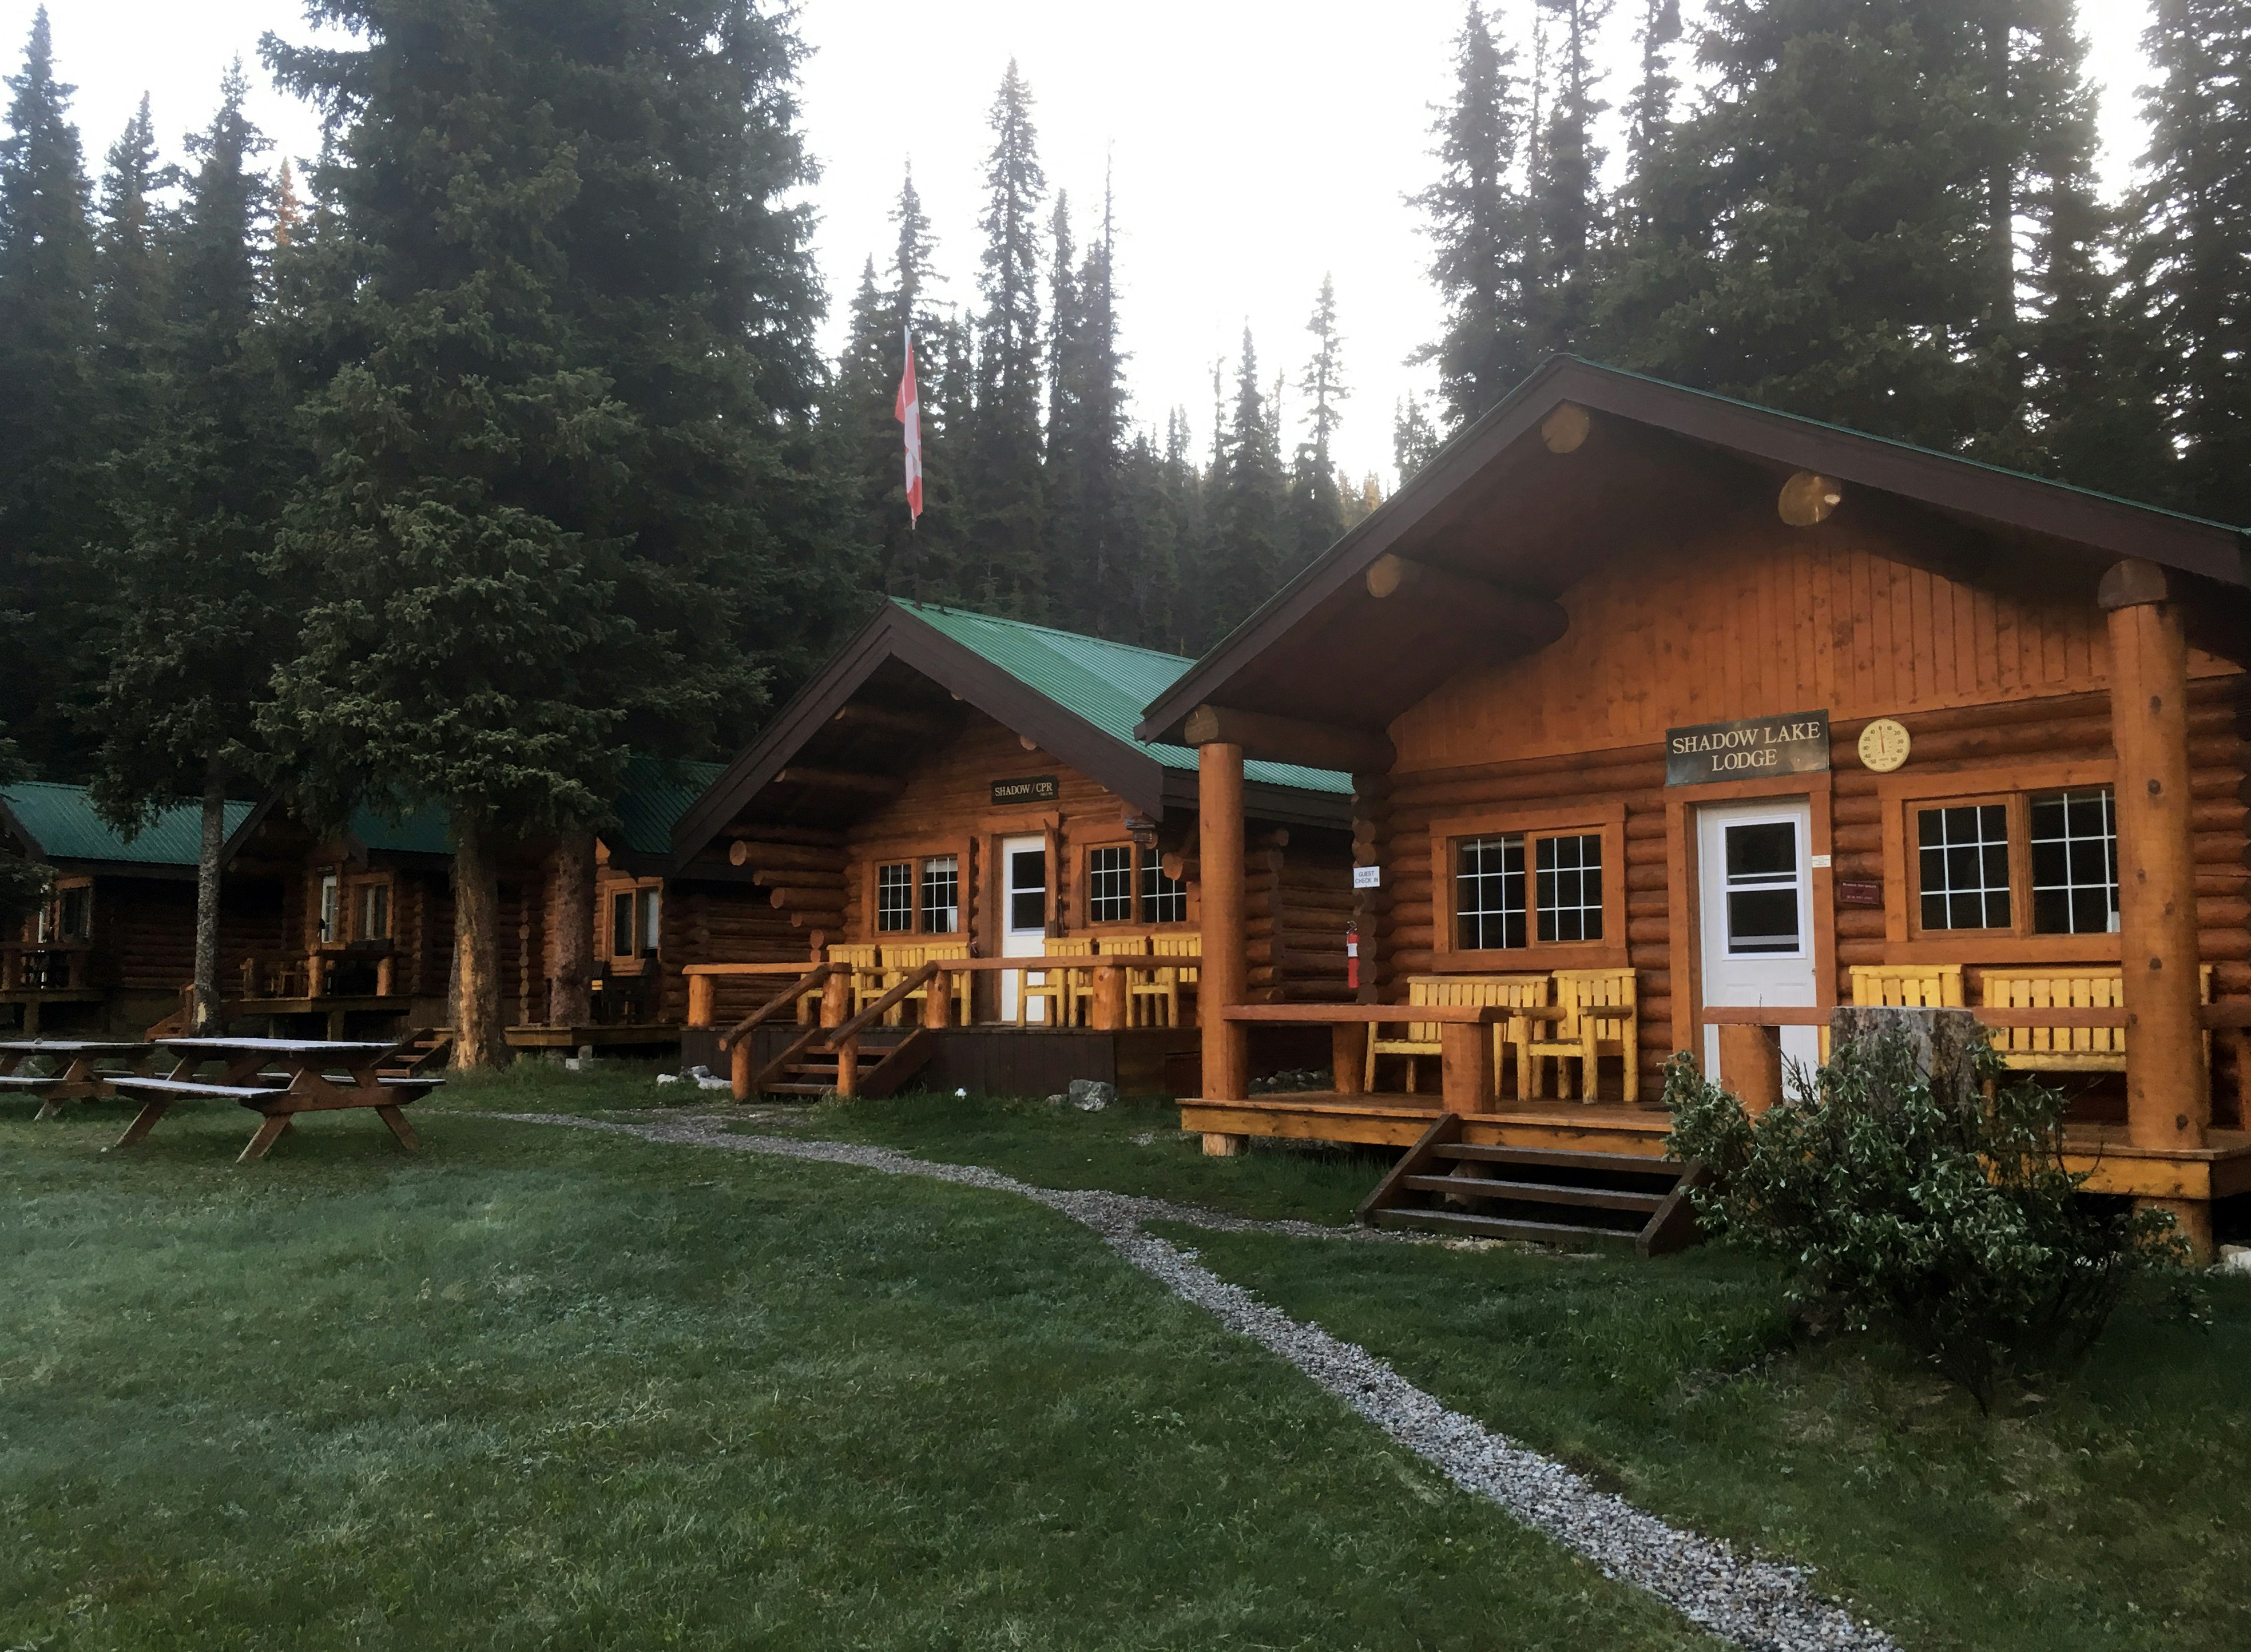 A line of log-cabin lodges are seen in the national park. The lodges have porches and look very clean; Banff and Jasper's backcountry lodges